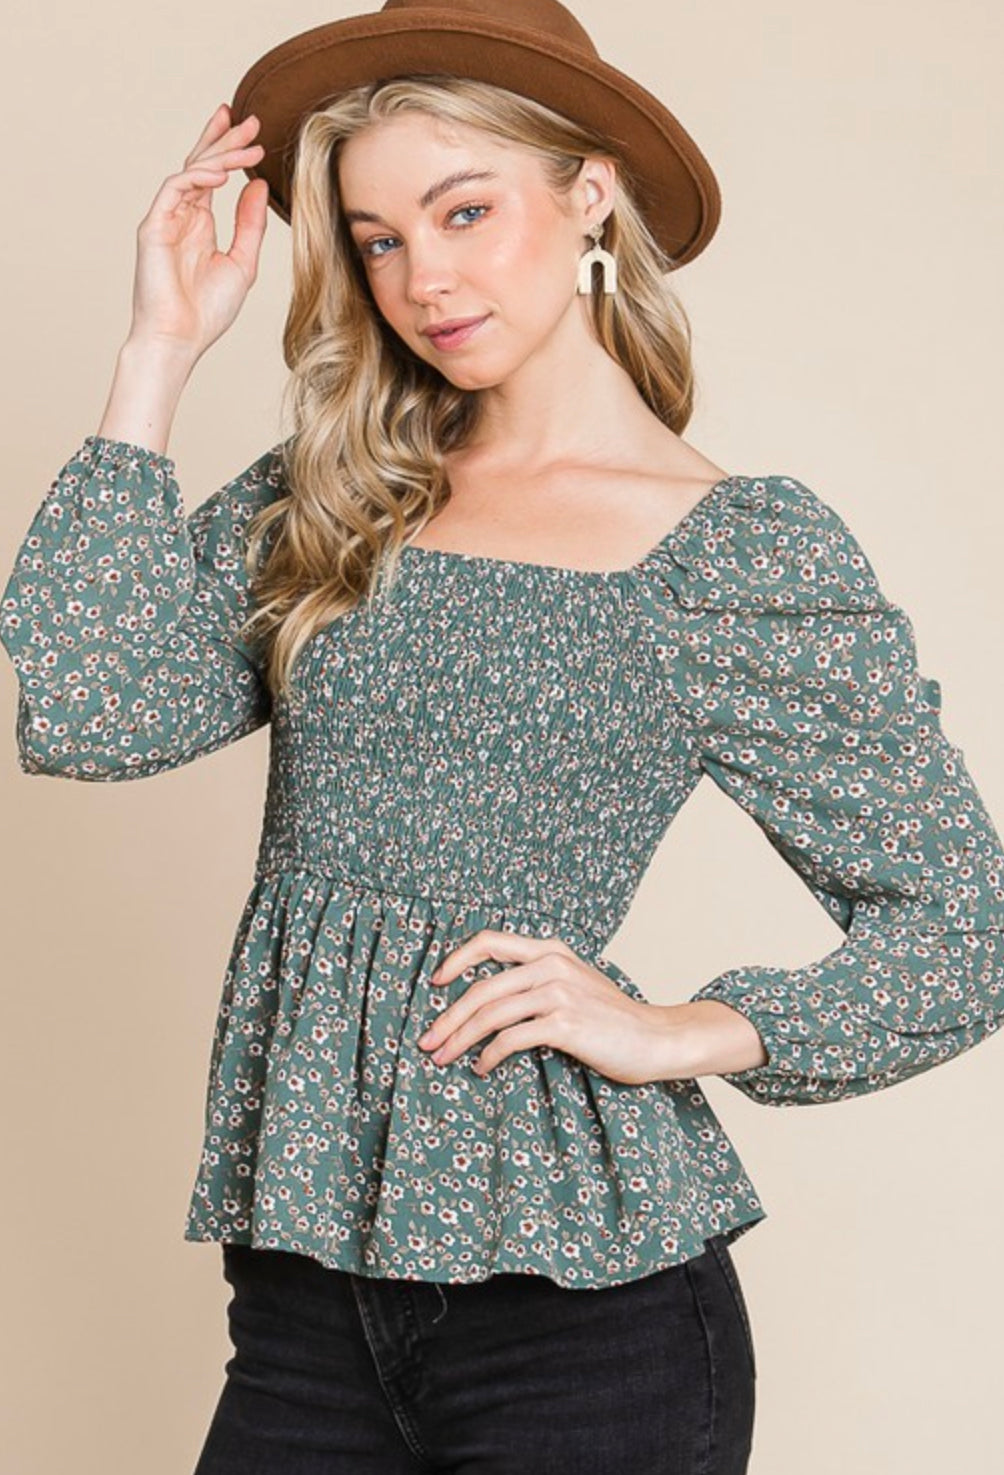 Small Town Dreamer Floral Blouse